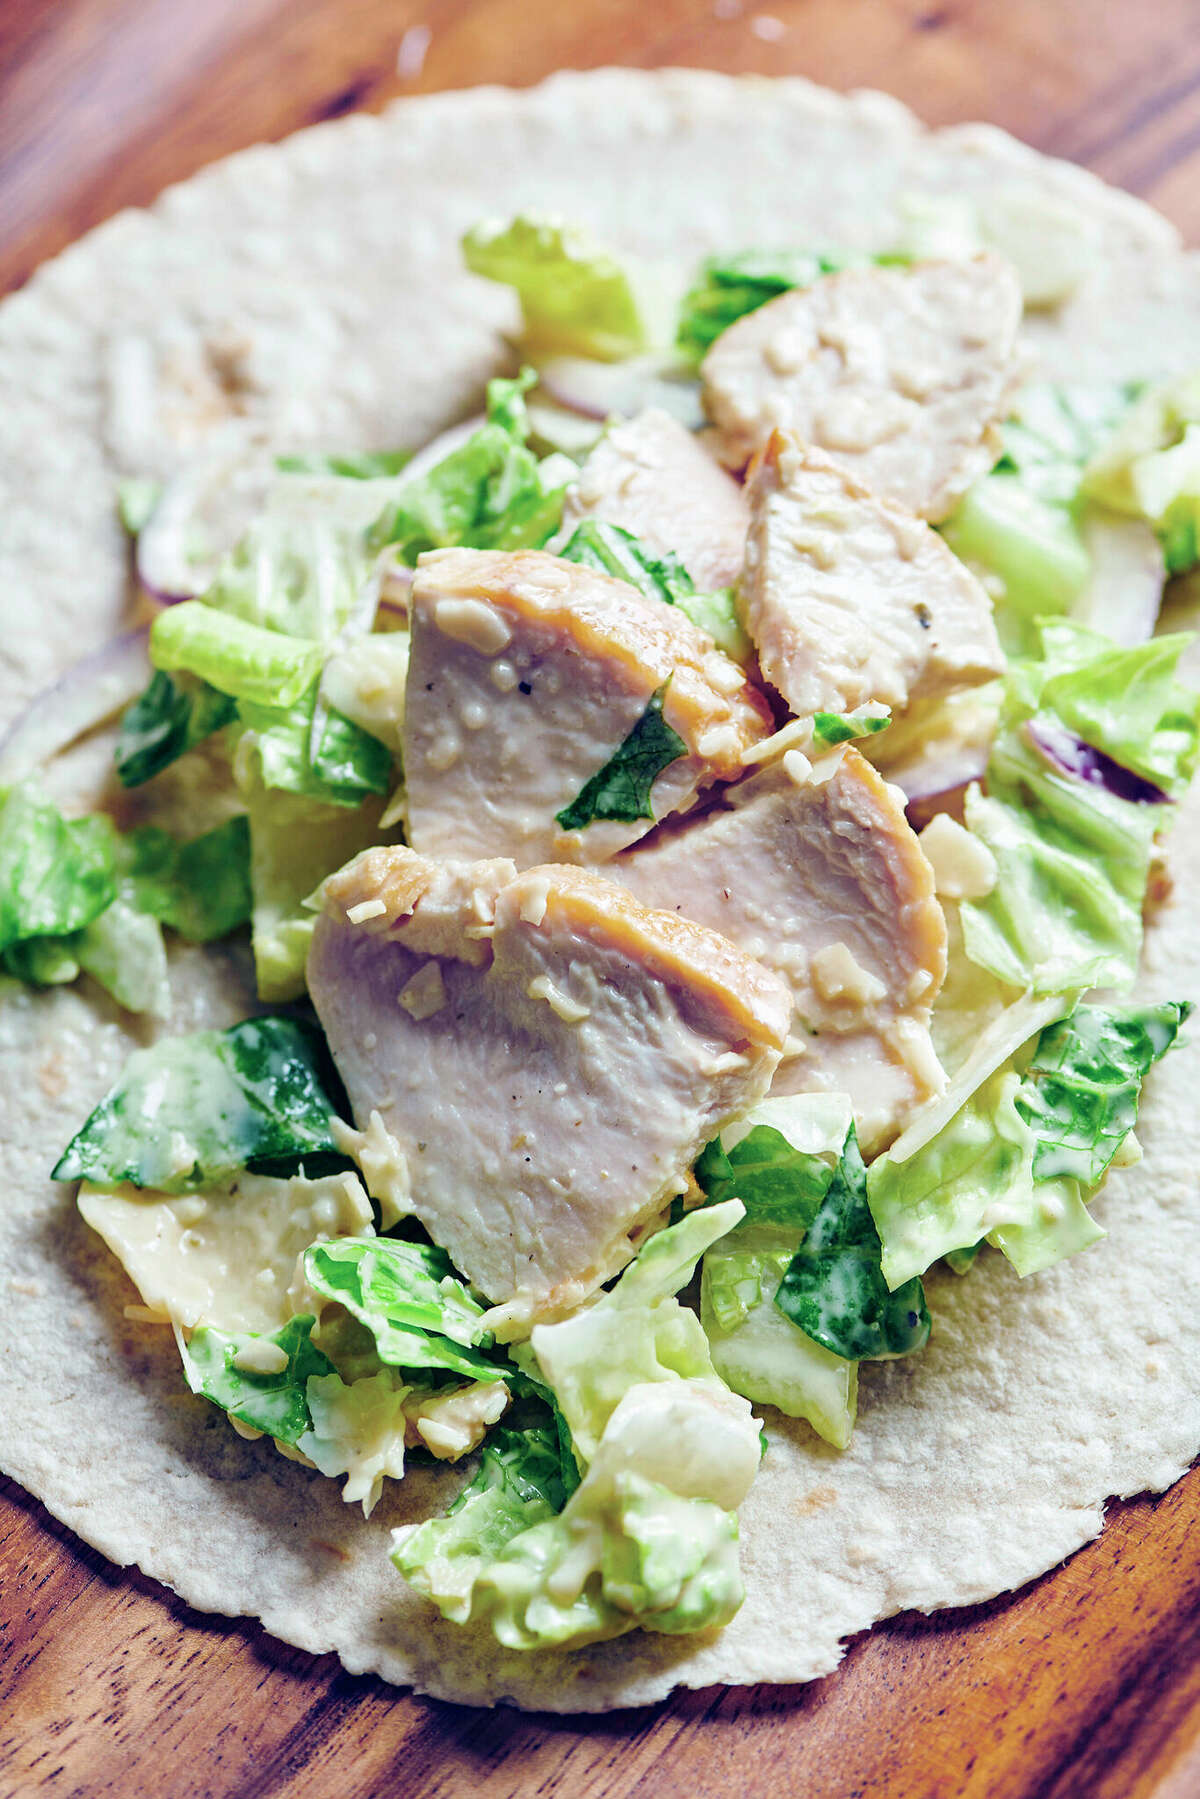 A chicken Caesar wrap is one way to use an old favorite in a new way.